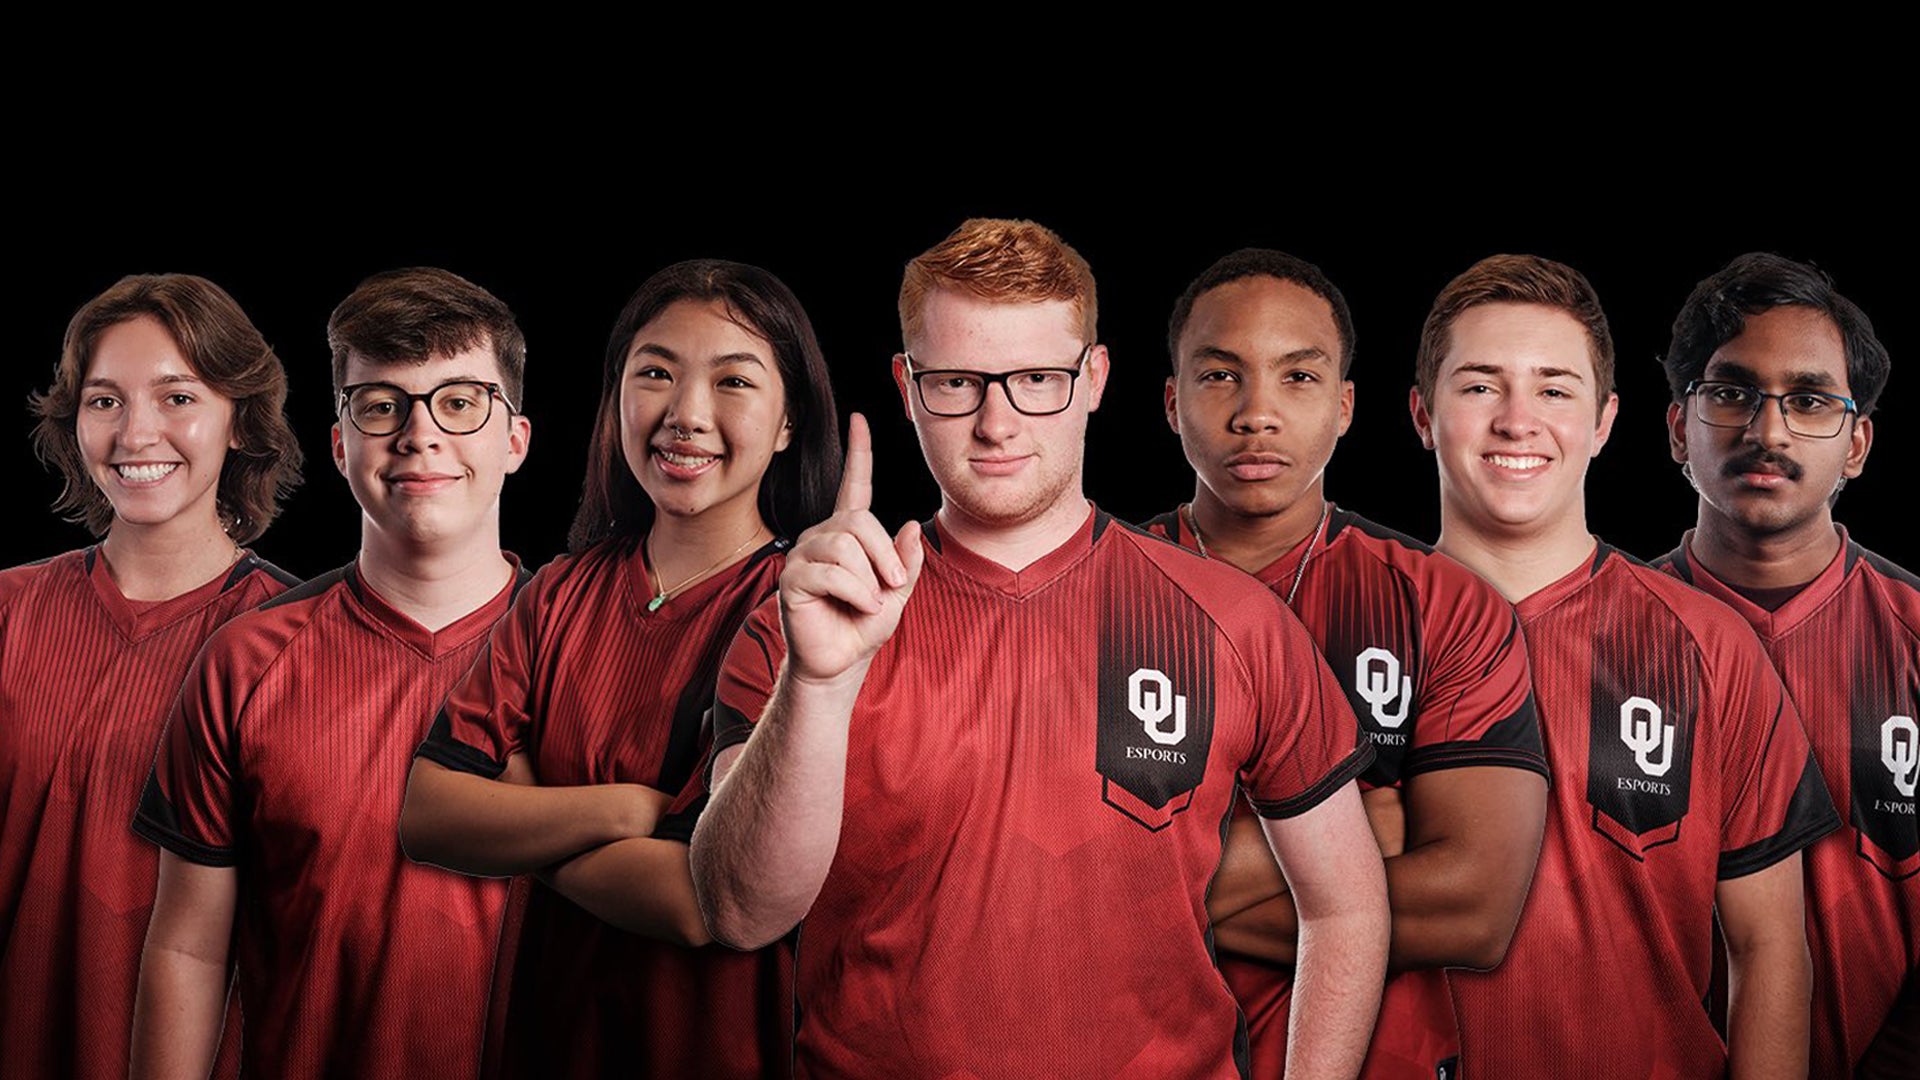 University of Oklahoma Receives Global Esports Award for The Collegiate Program of The Year